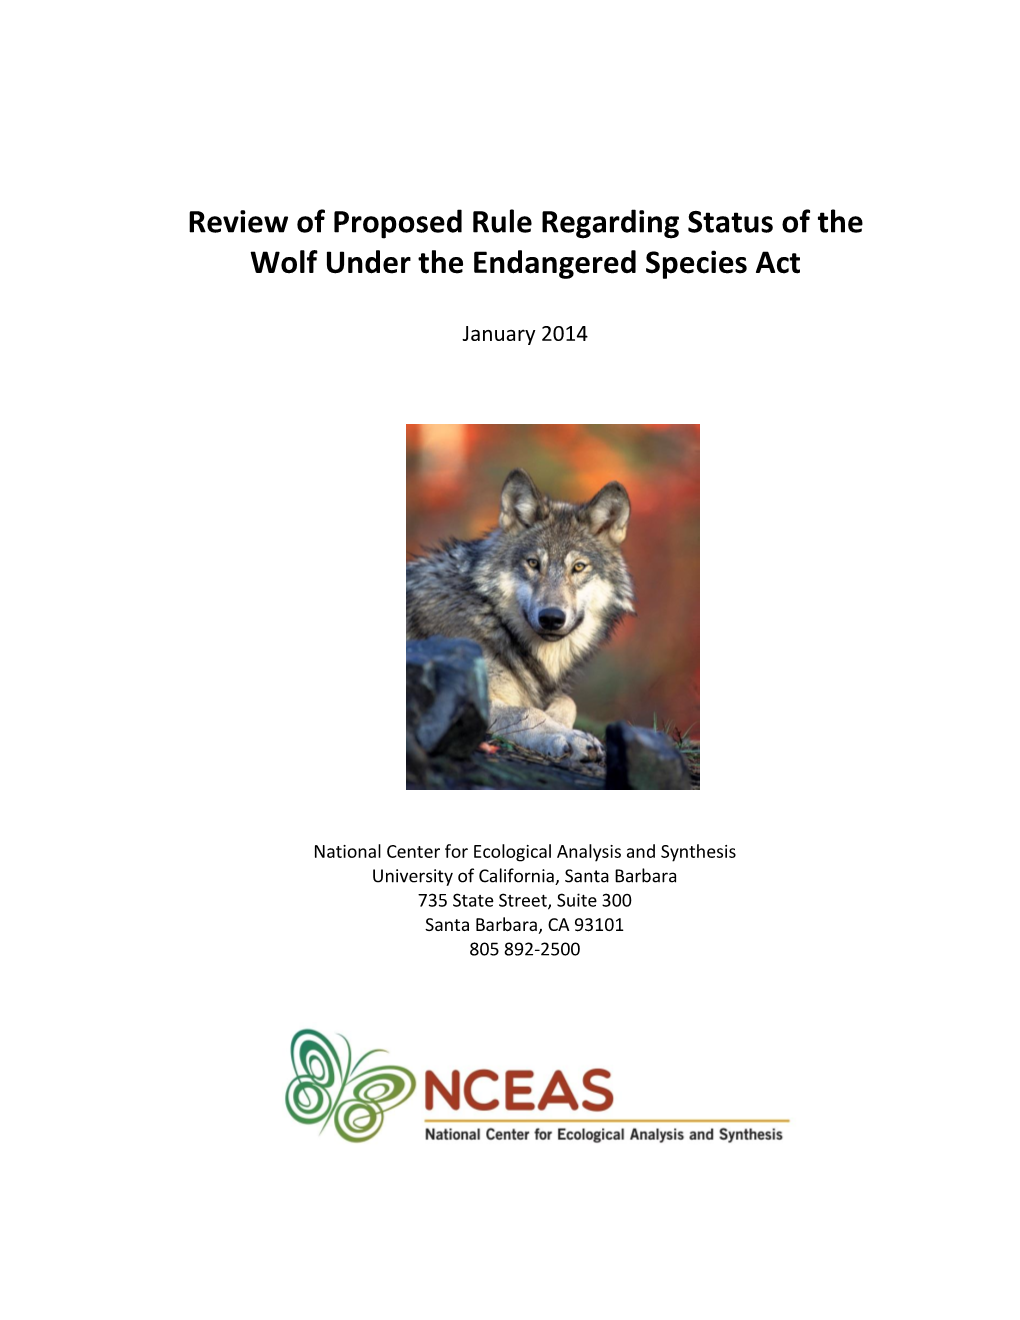 Review of Proposed Rule Regarding Status of the Wolf Under the Endangered Species Act